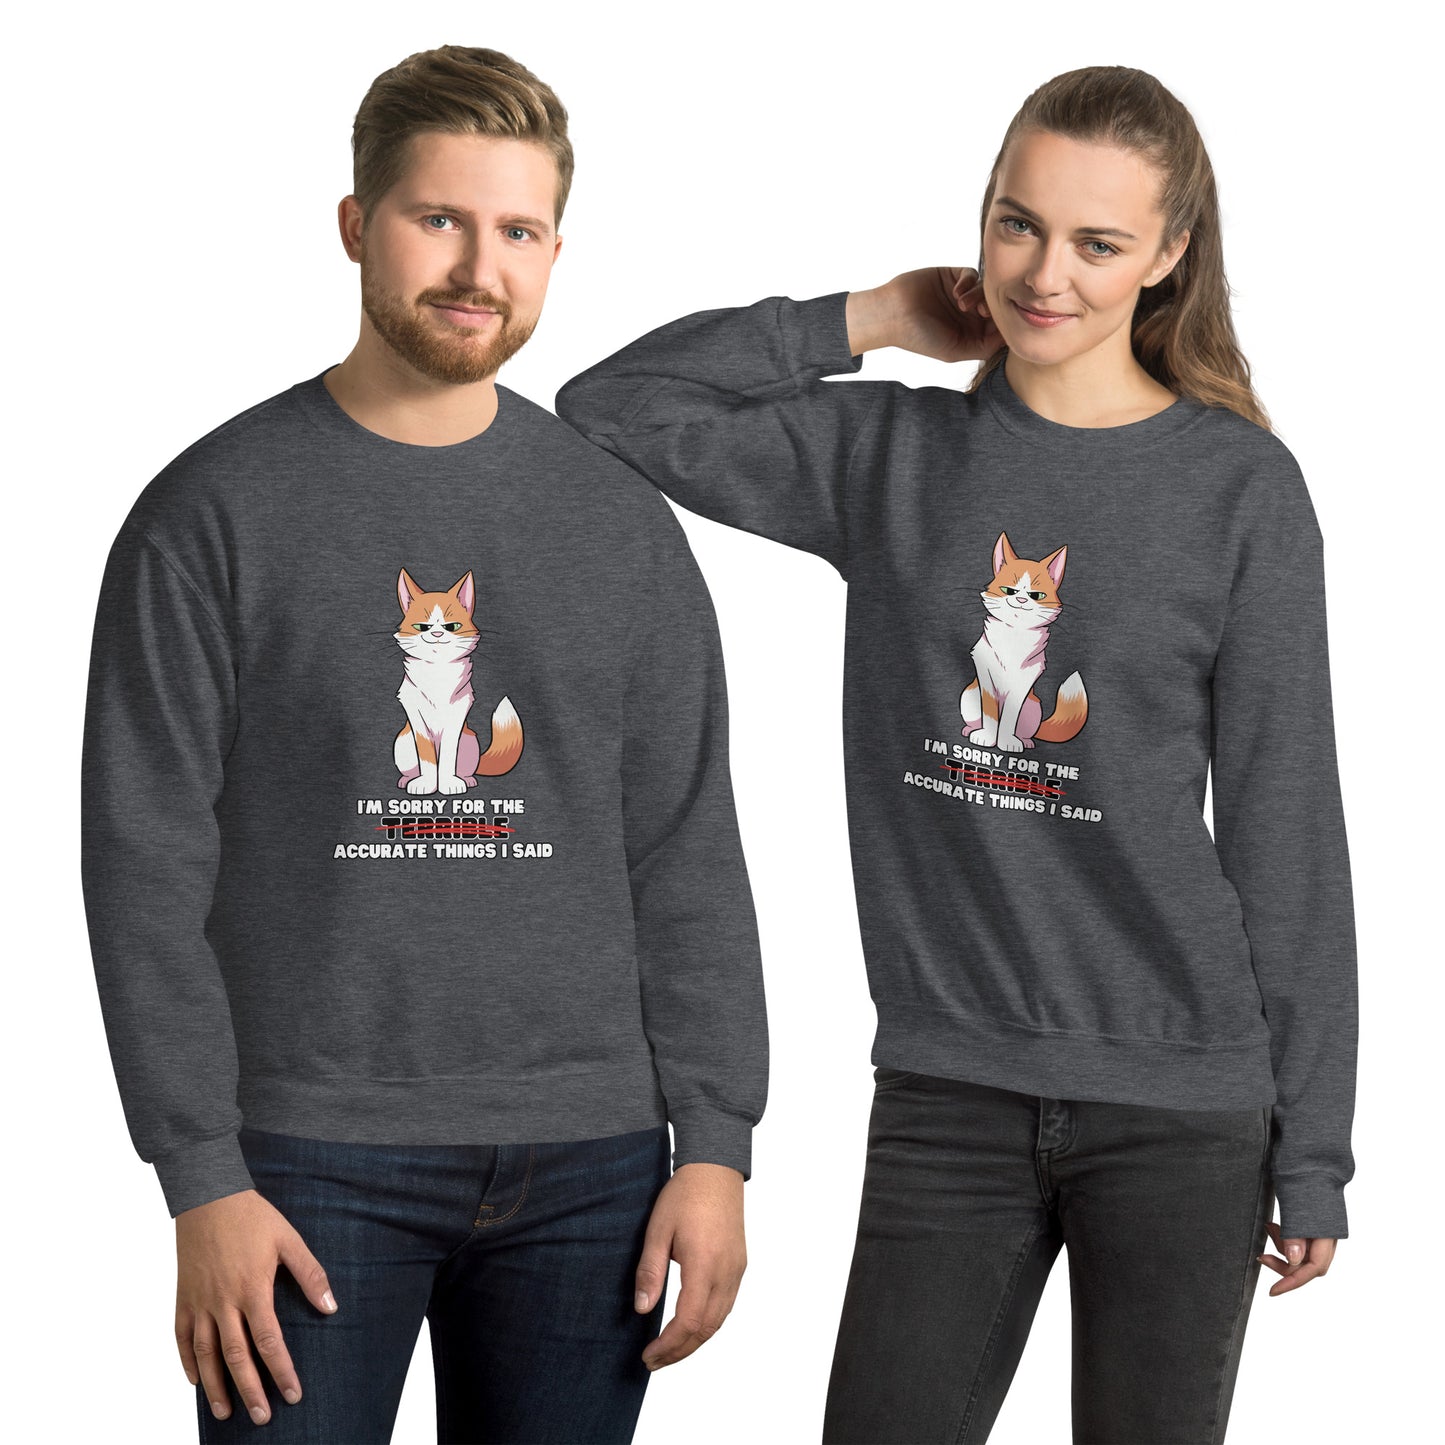 Ginger - Sorry for the Terrible... Accurate Things I Said Unisex Sweatshirt